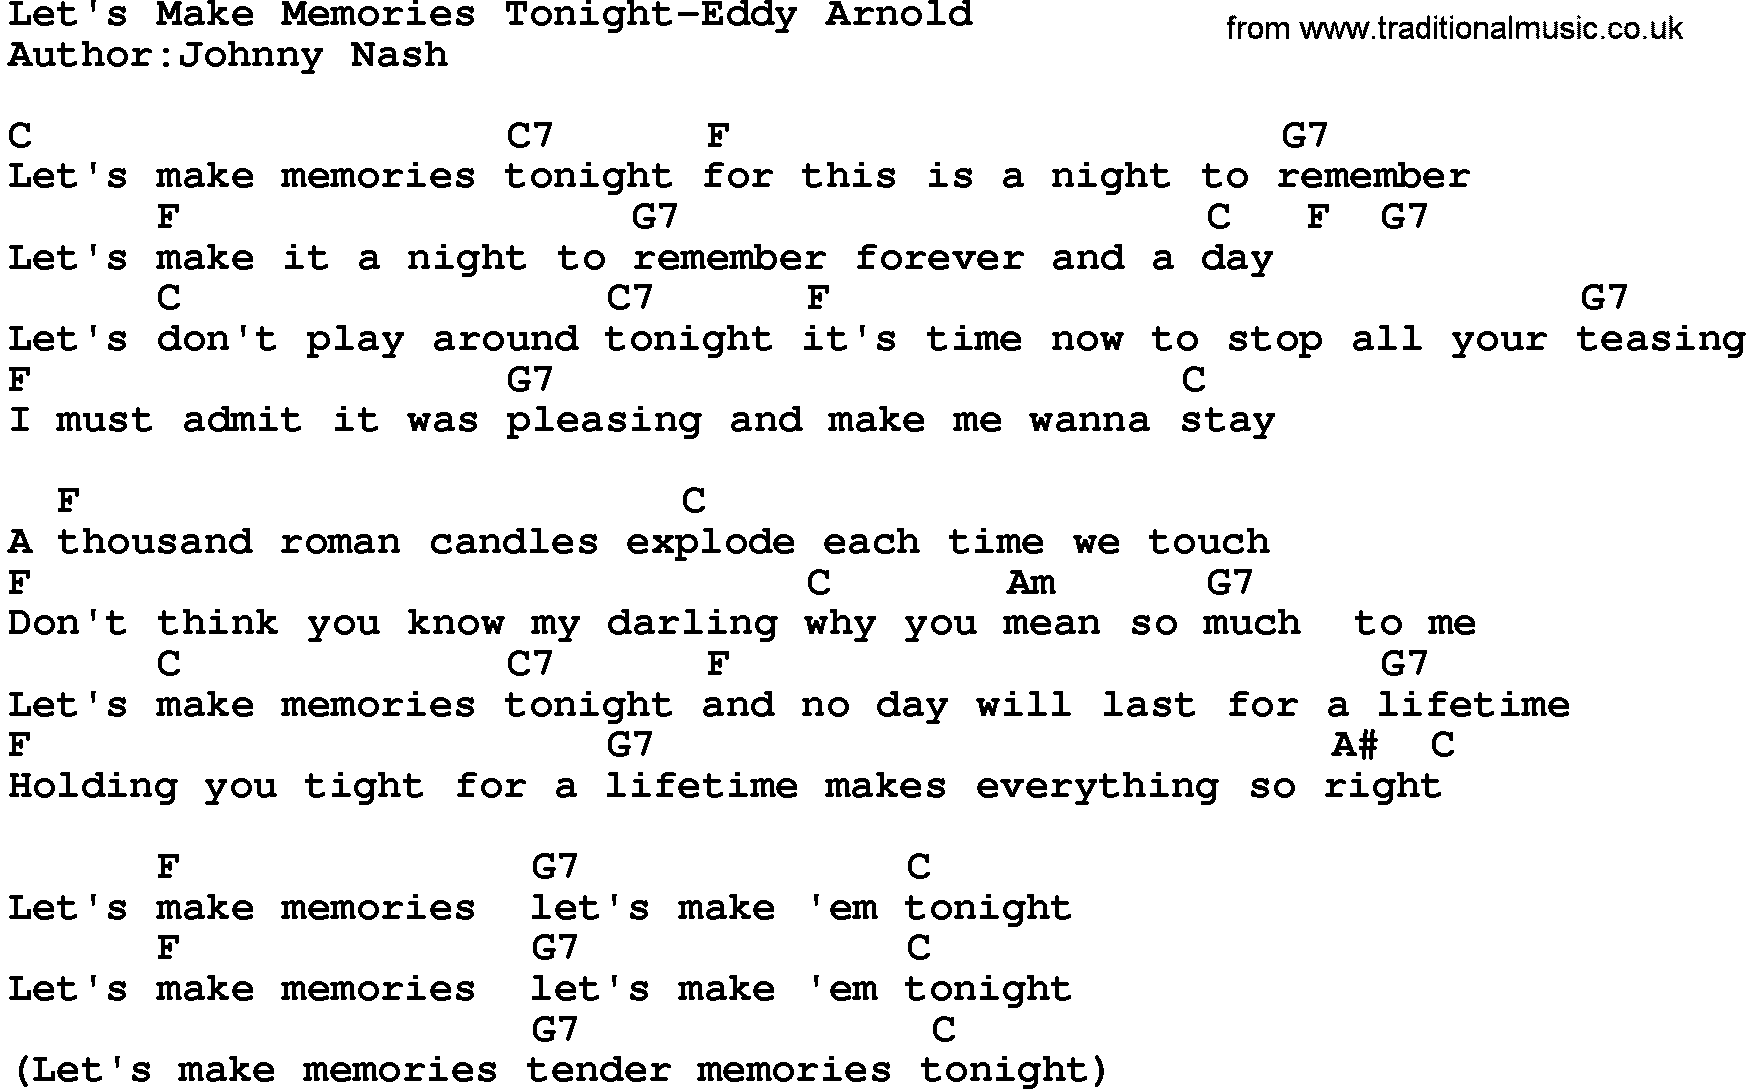 Country music song: Let's Make Memories Tonight-Eddy Arnold lyrics and chords